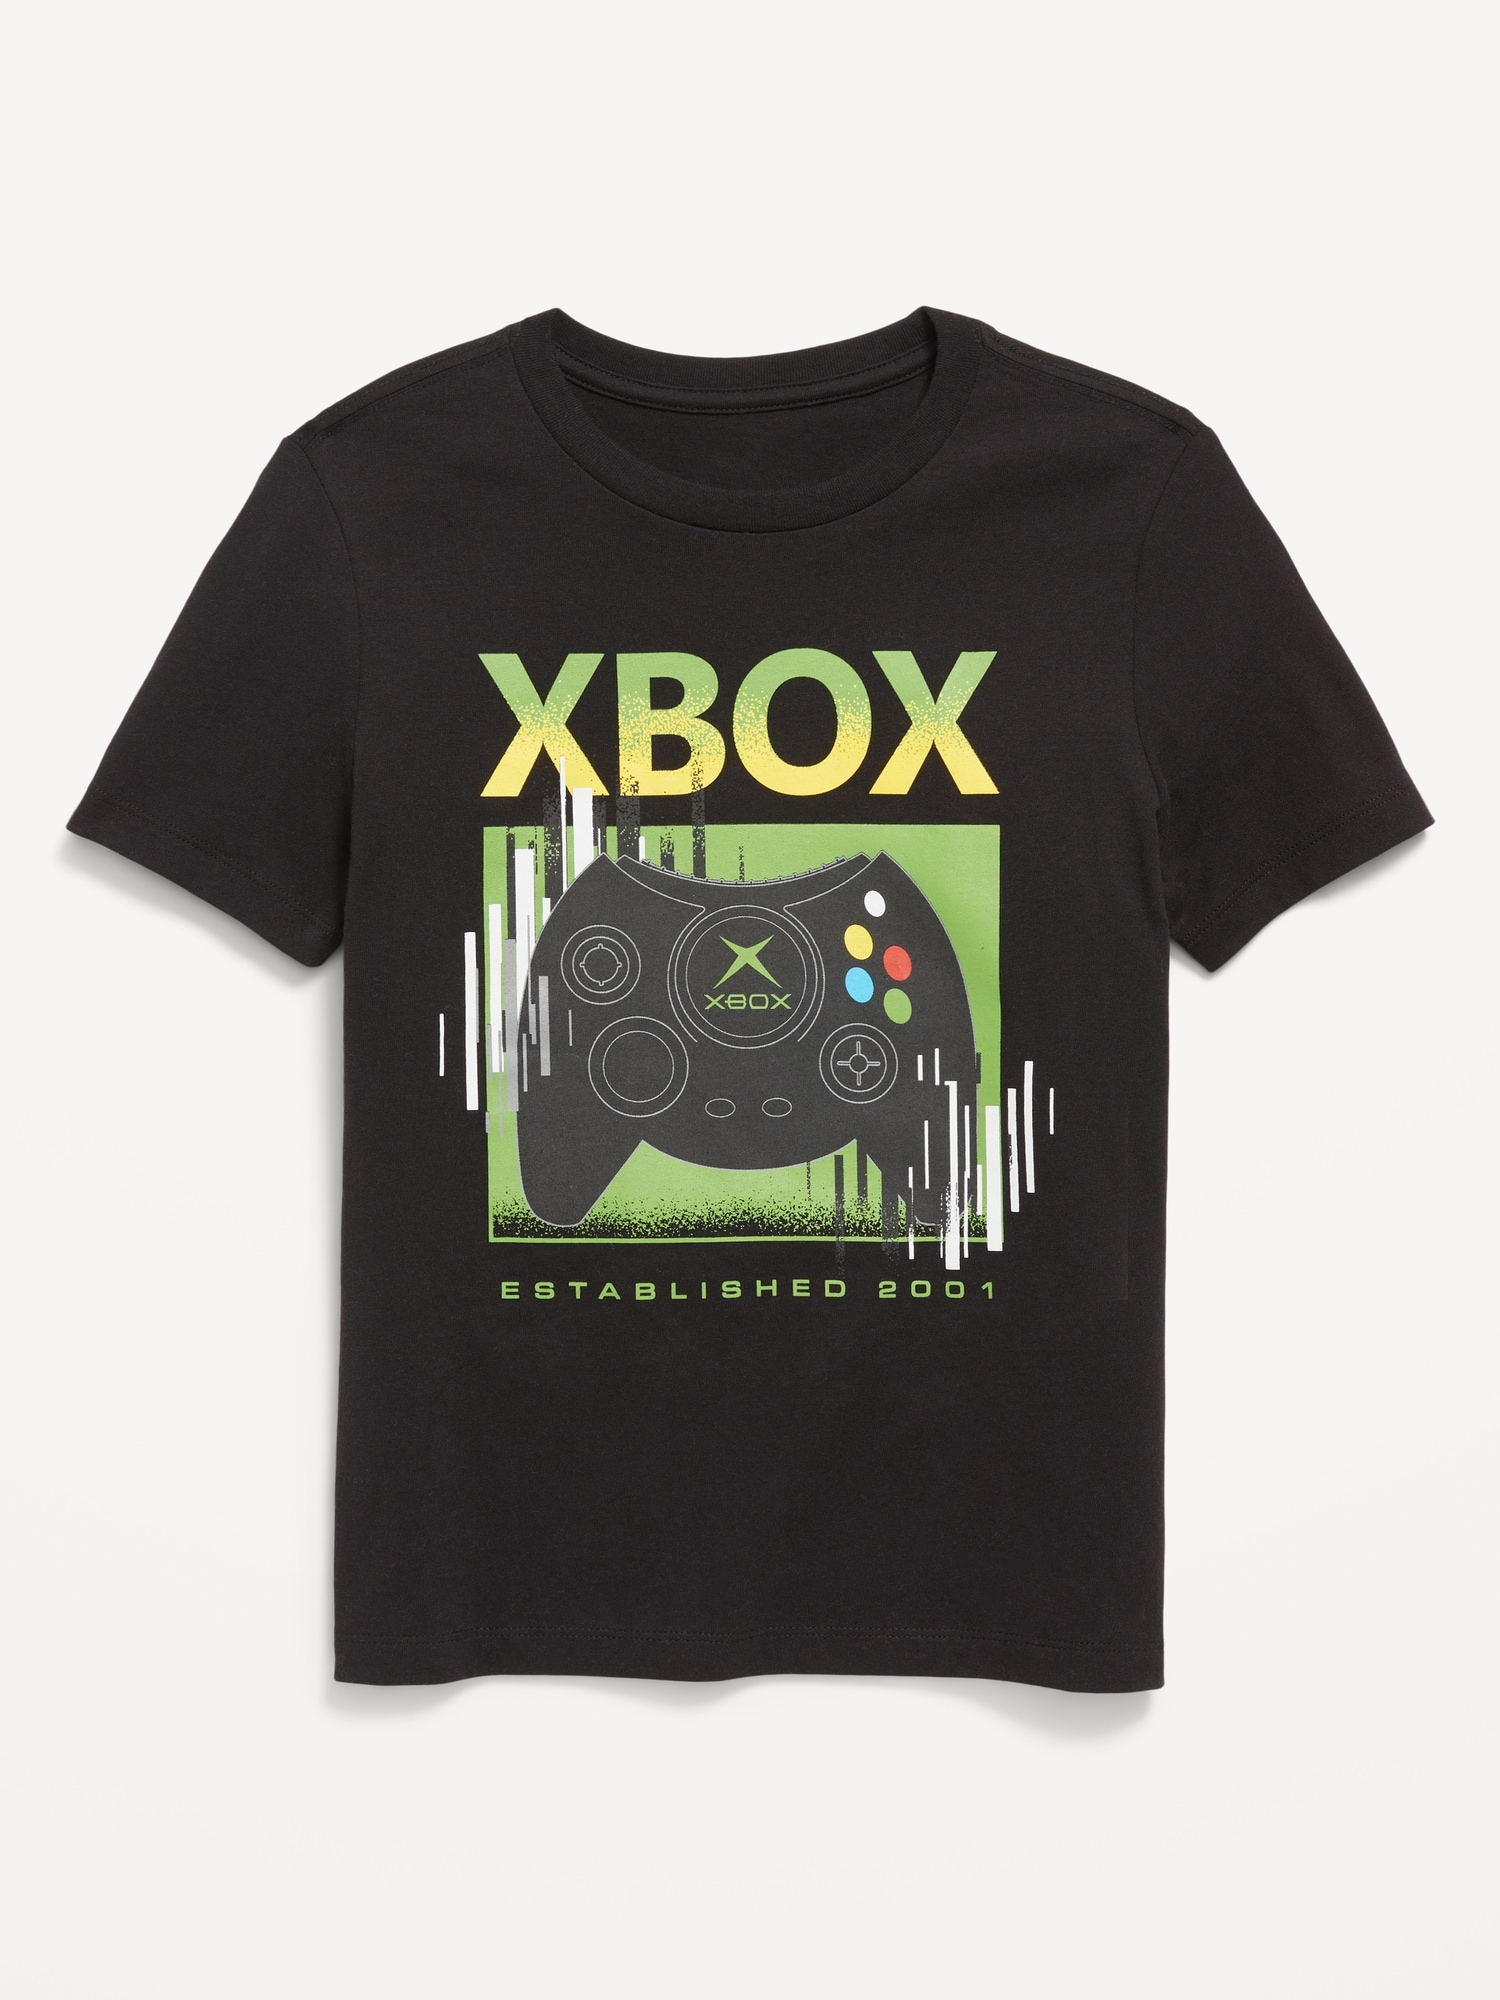 XBOX Gender-Neutral Graphic T-Shirt for Kids Hot Deal